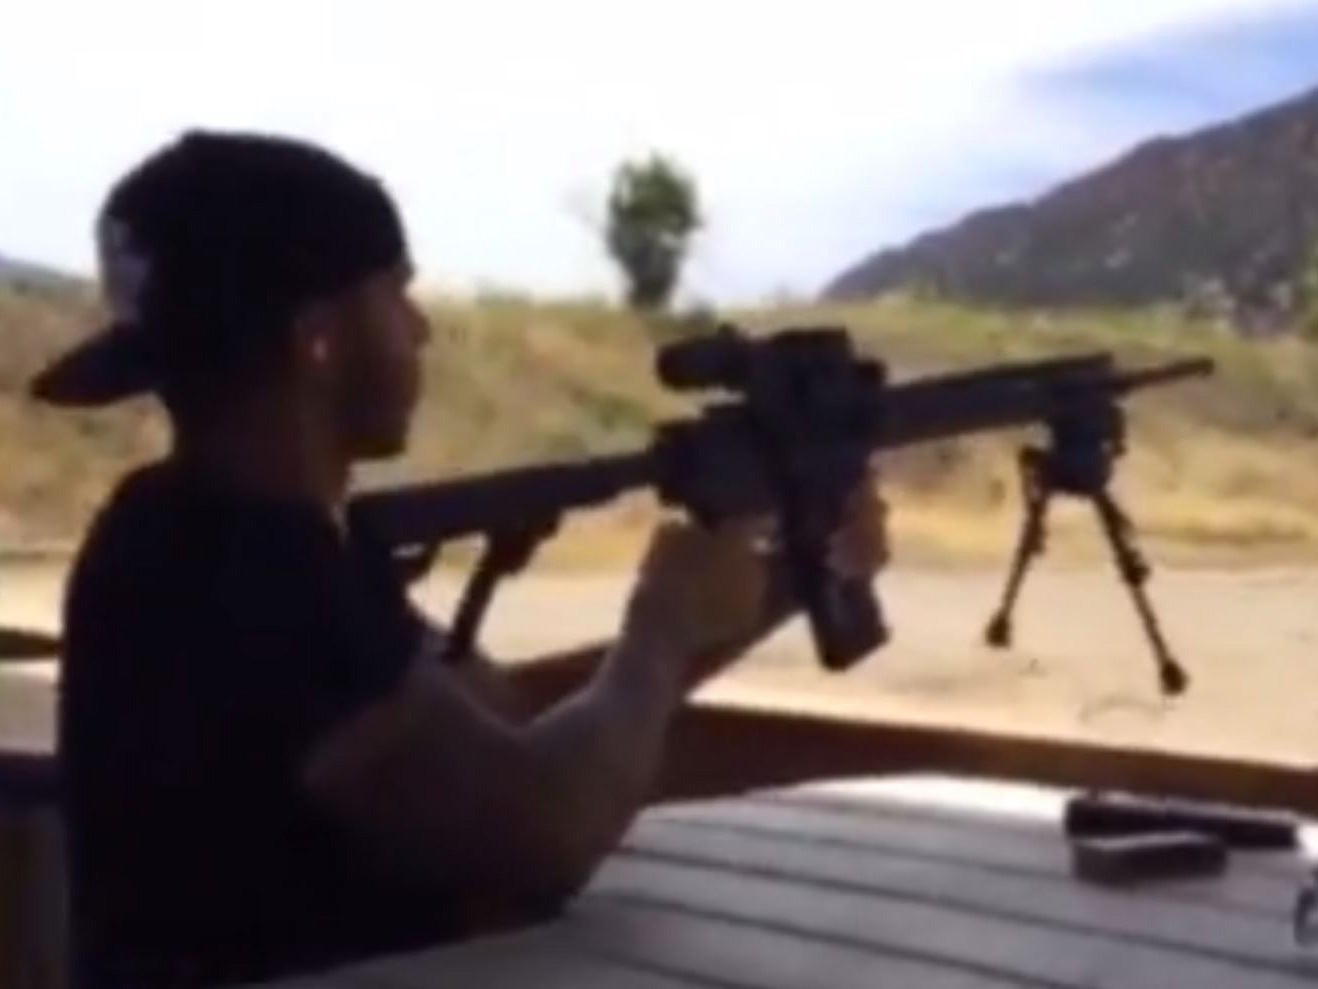 Lewis Hamilton shooting an AK-47 in a video on his Instagram account